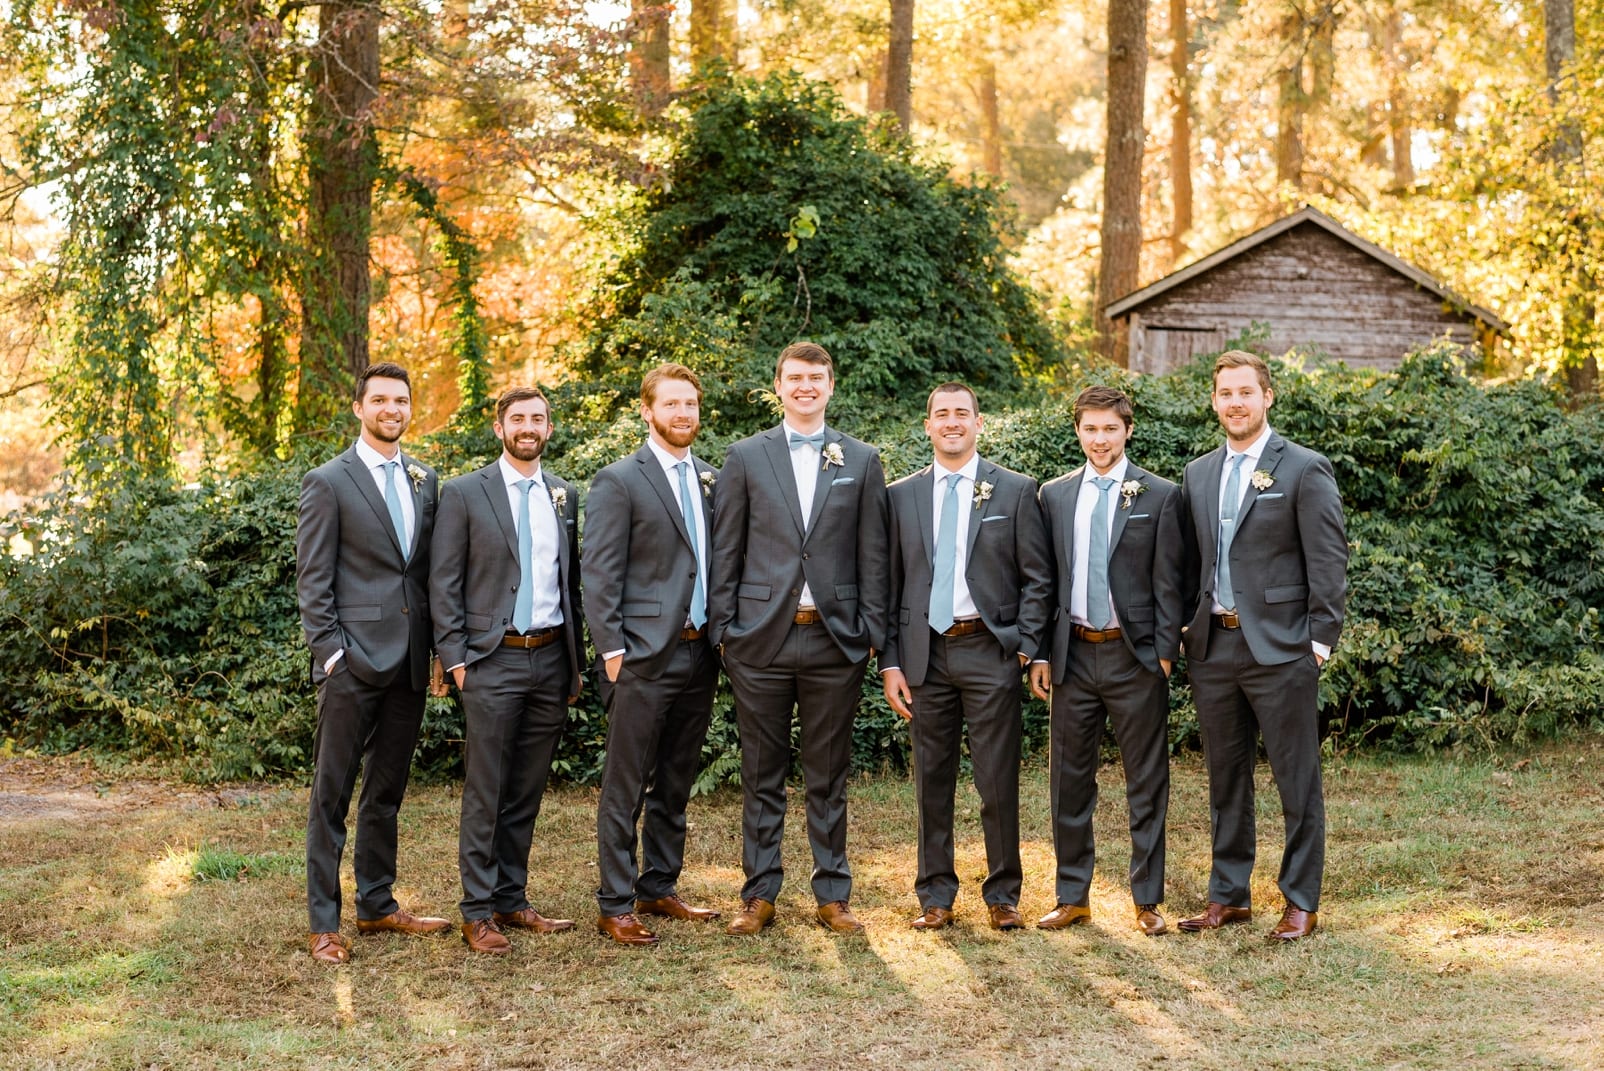 Oaks at Salem groom and groomsmen standing together in front of an old barn photo